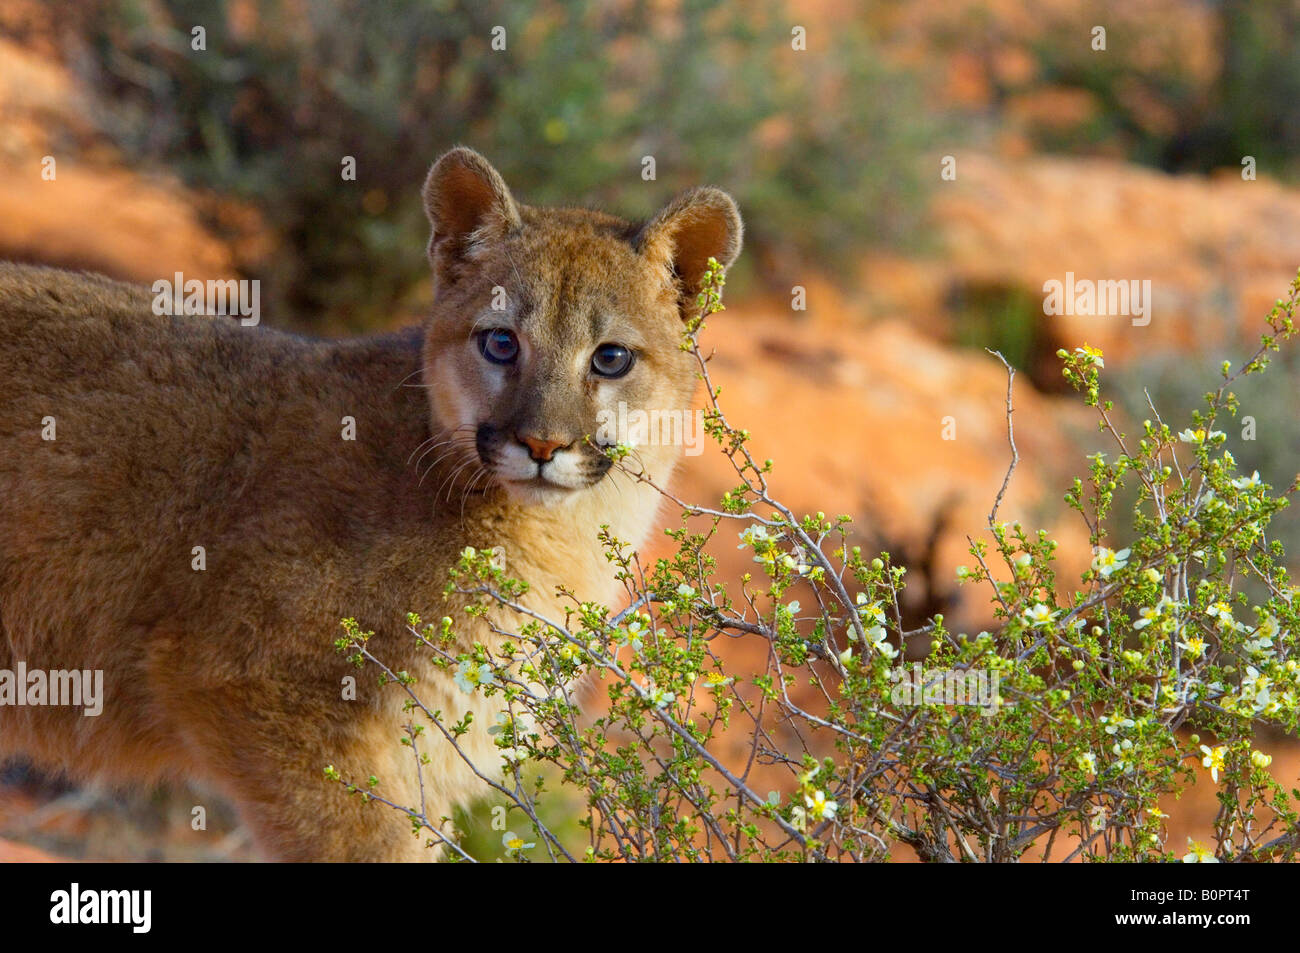 Cougar or Mountain Lion in Native Habitat Stock Photo - Alamy